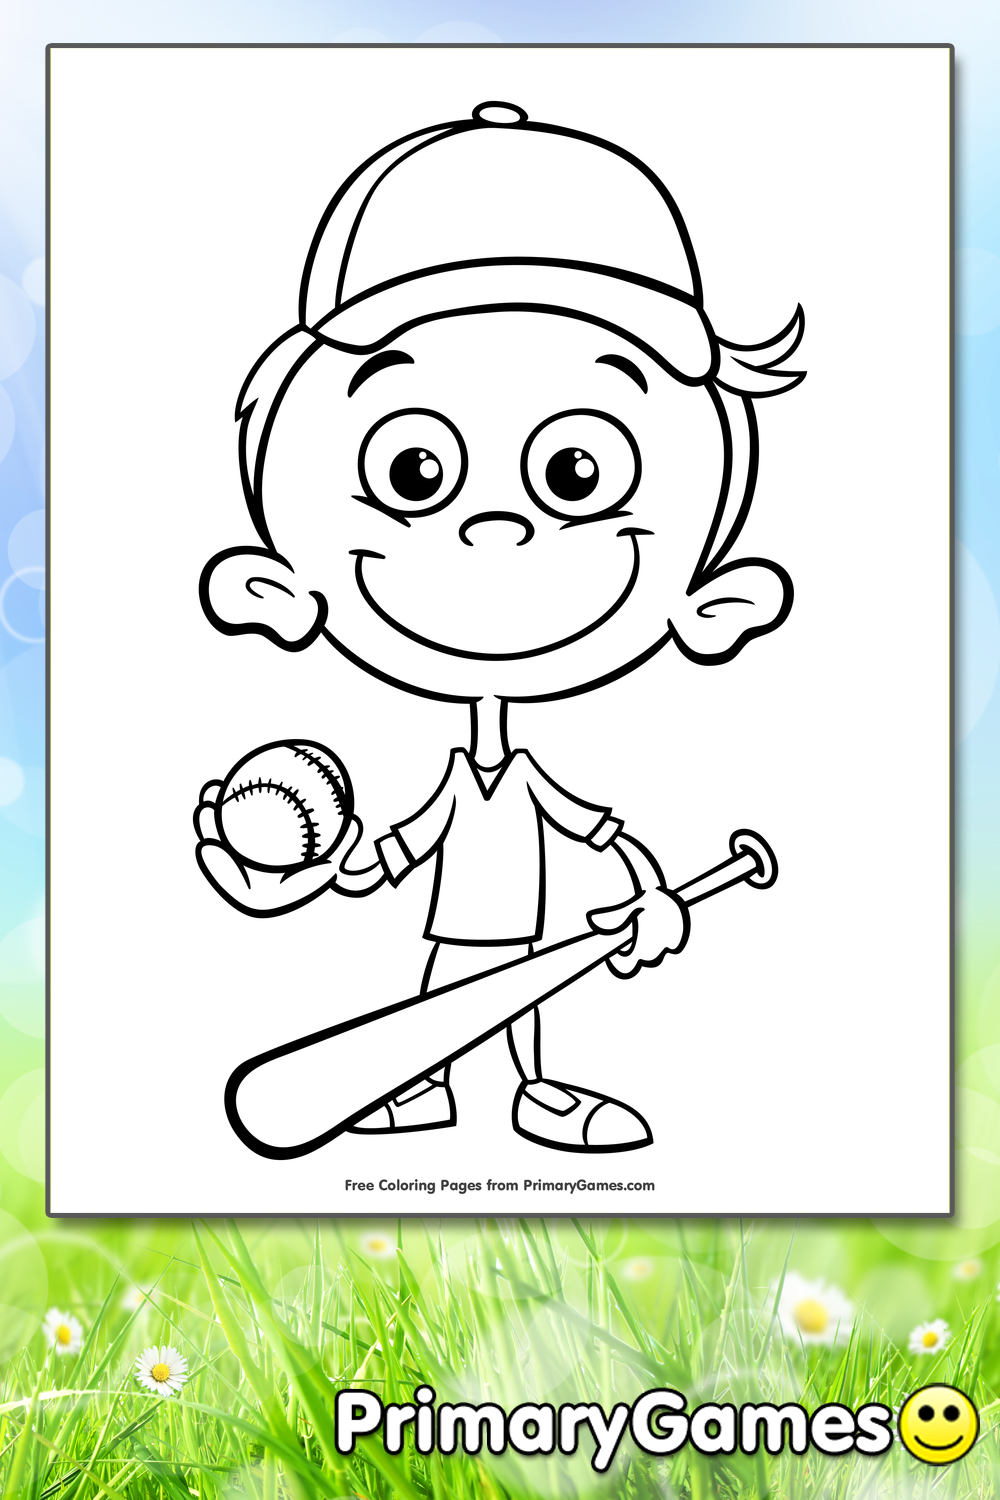 Baseball Coloring Pages - Free Printables - Growing Play